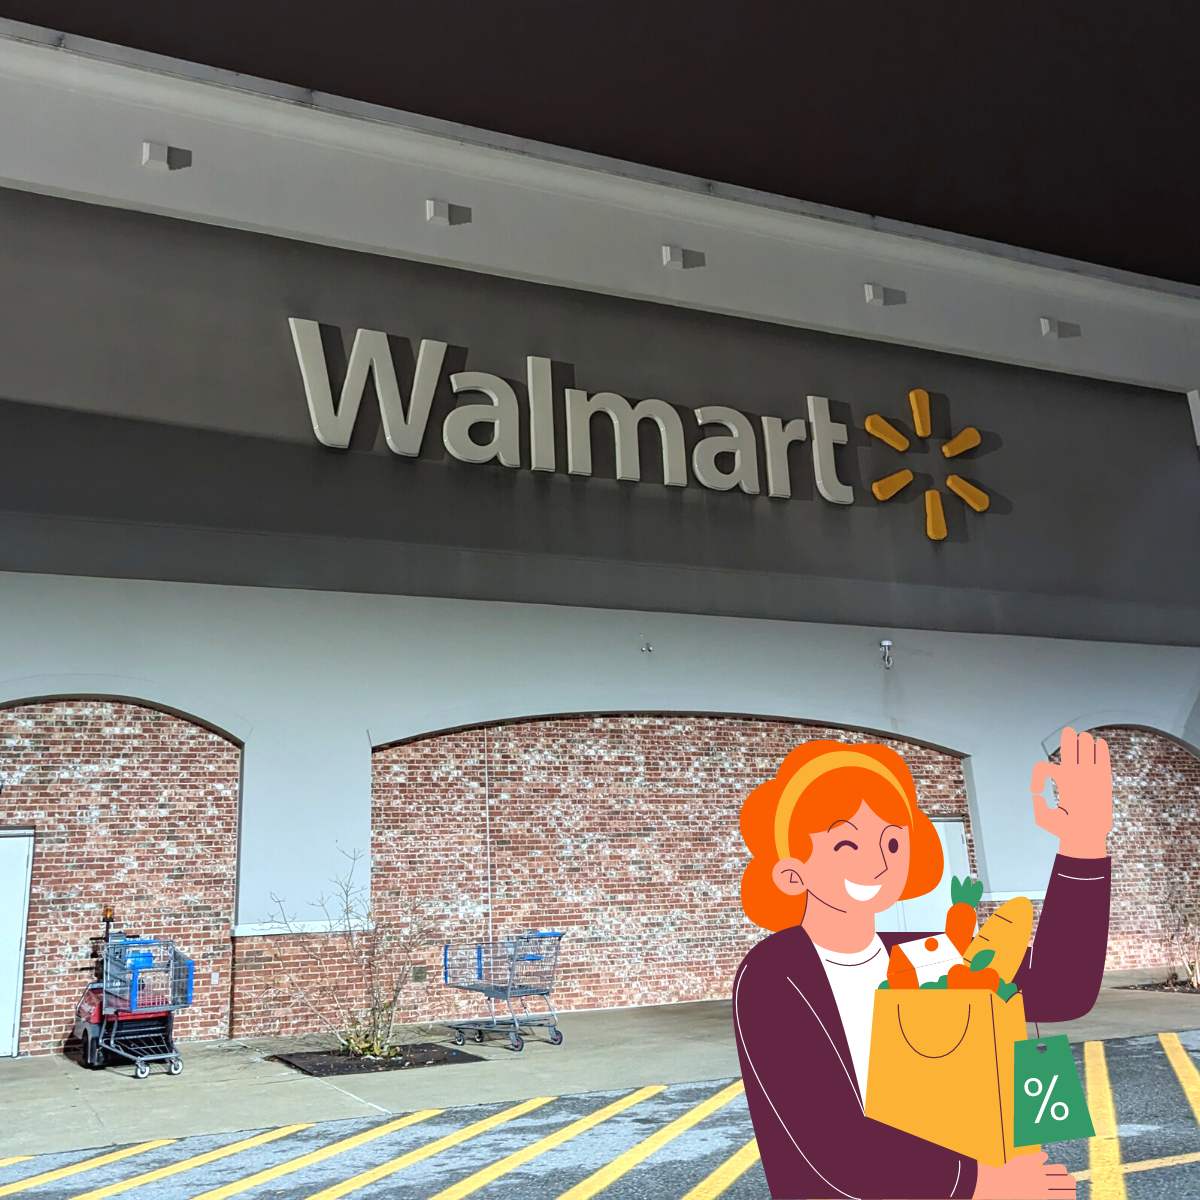 Walmart storefront with a carton lady holding a shopping bag.